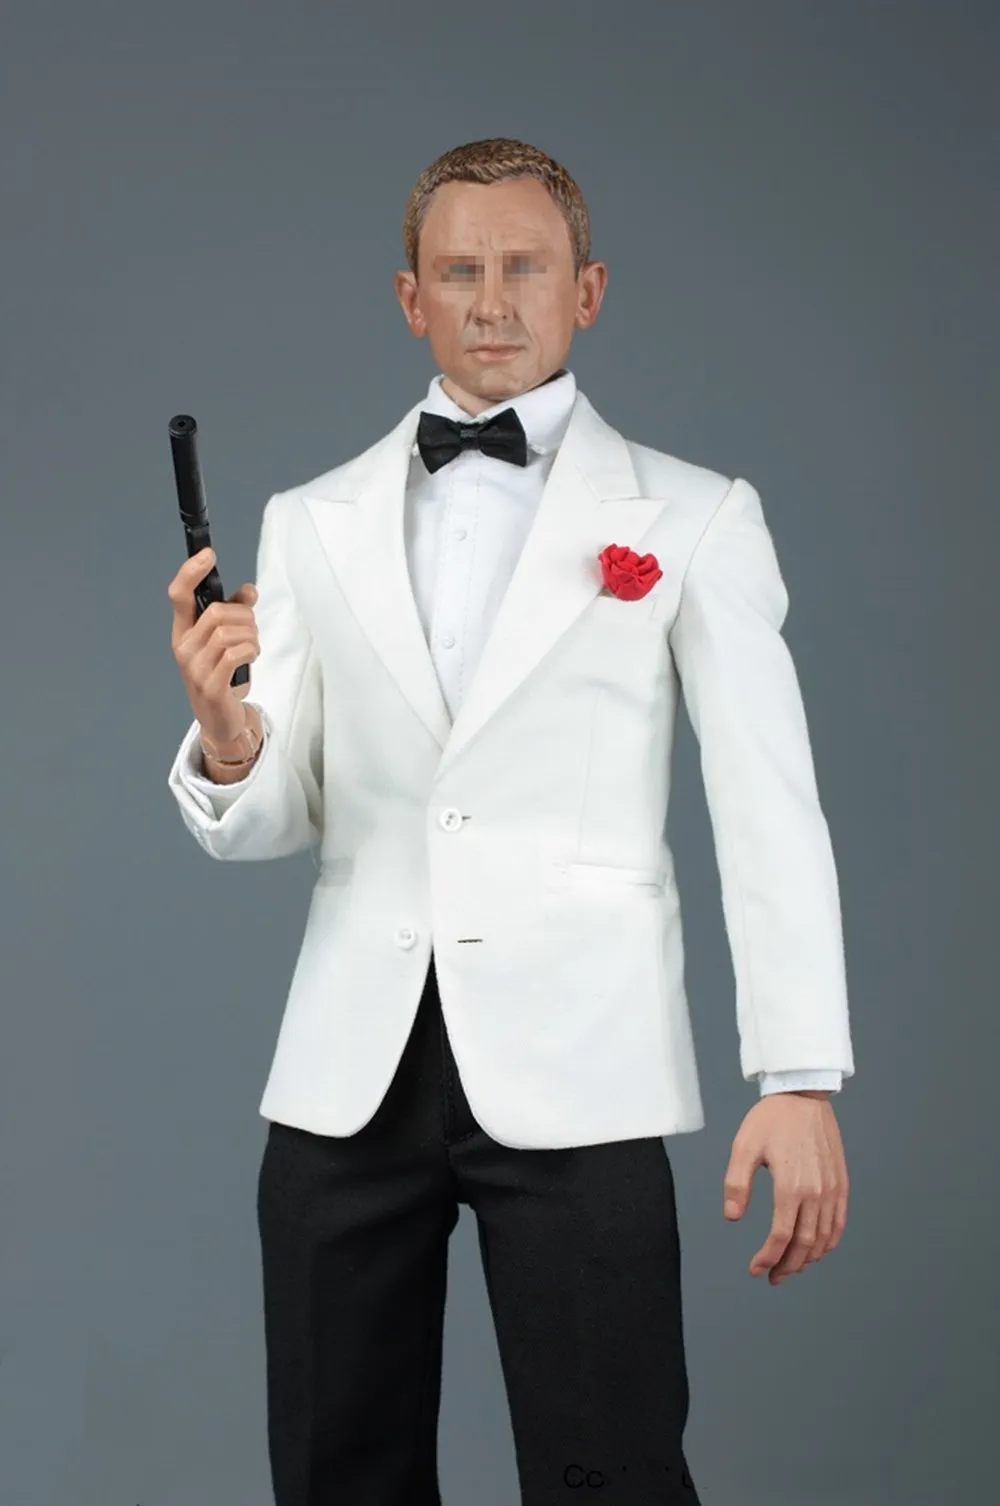 AFS Action Figures 1/6 Scale Royal Agent James White Dress Shirt